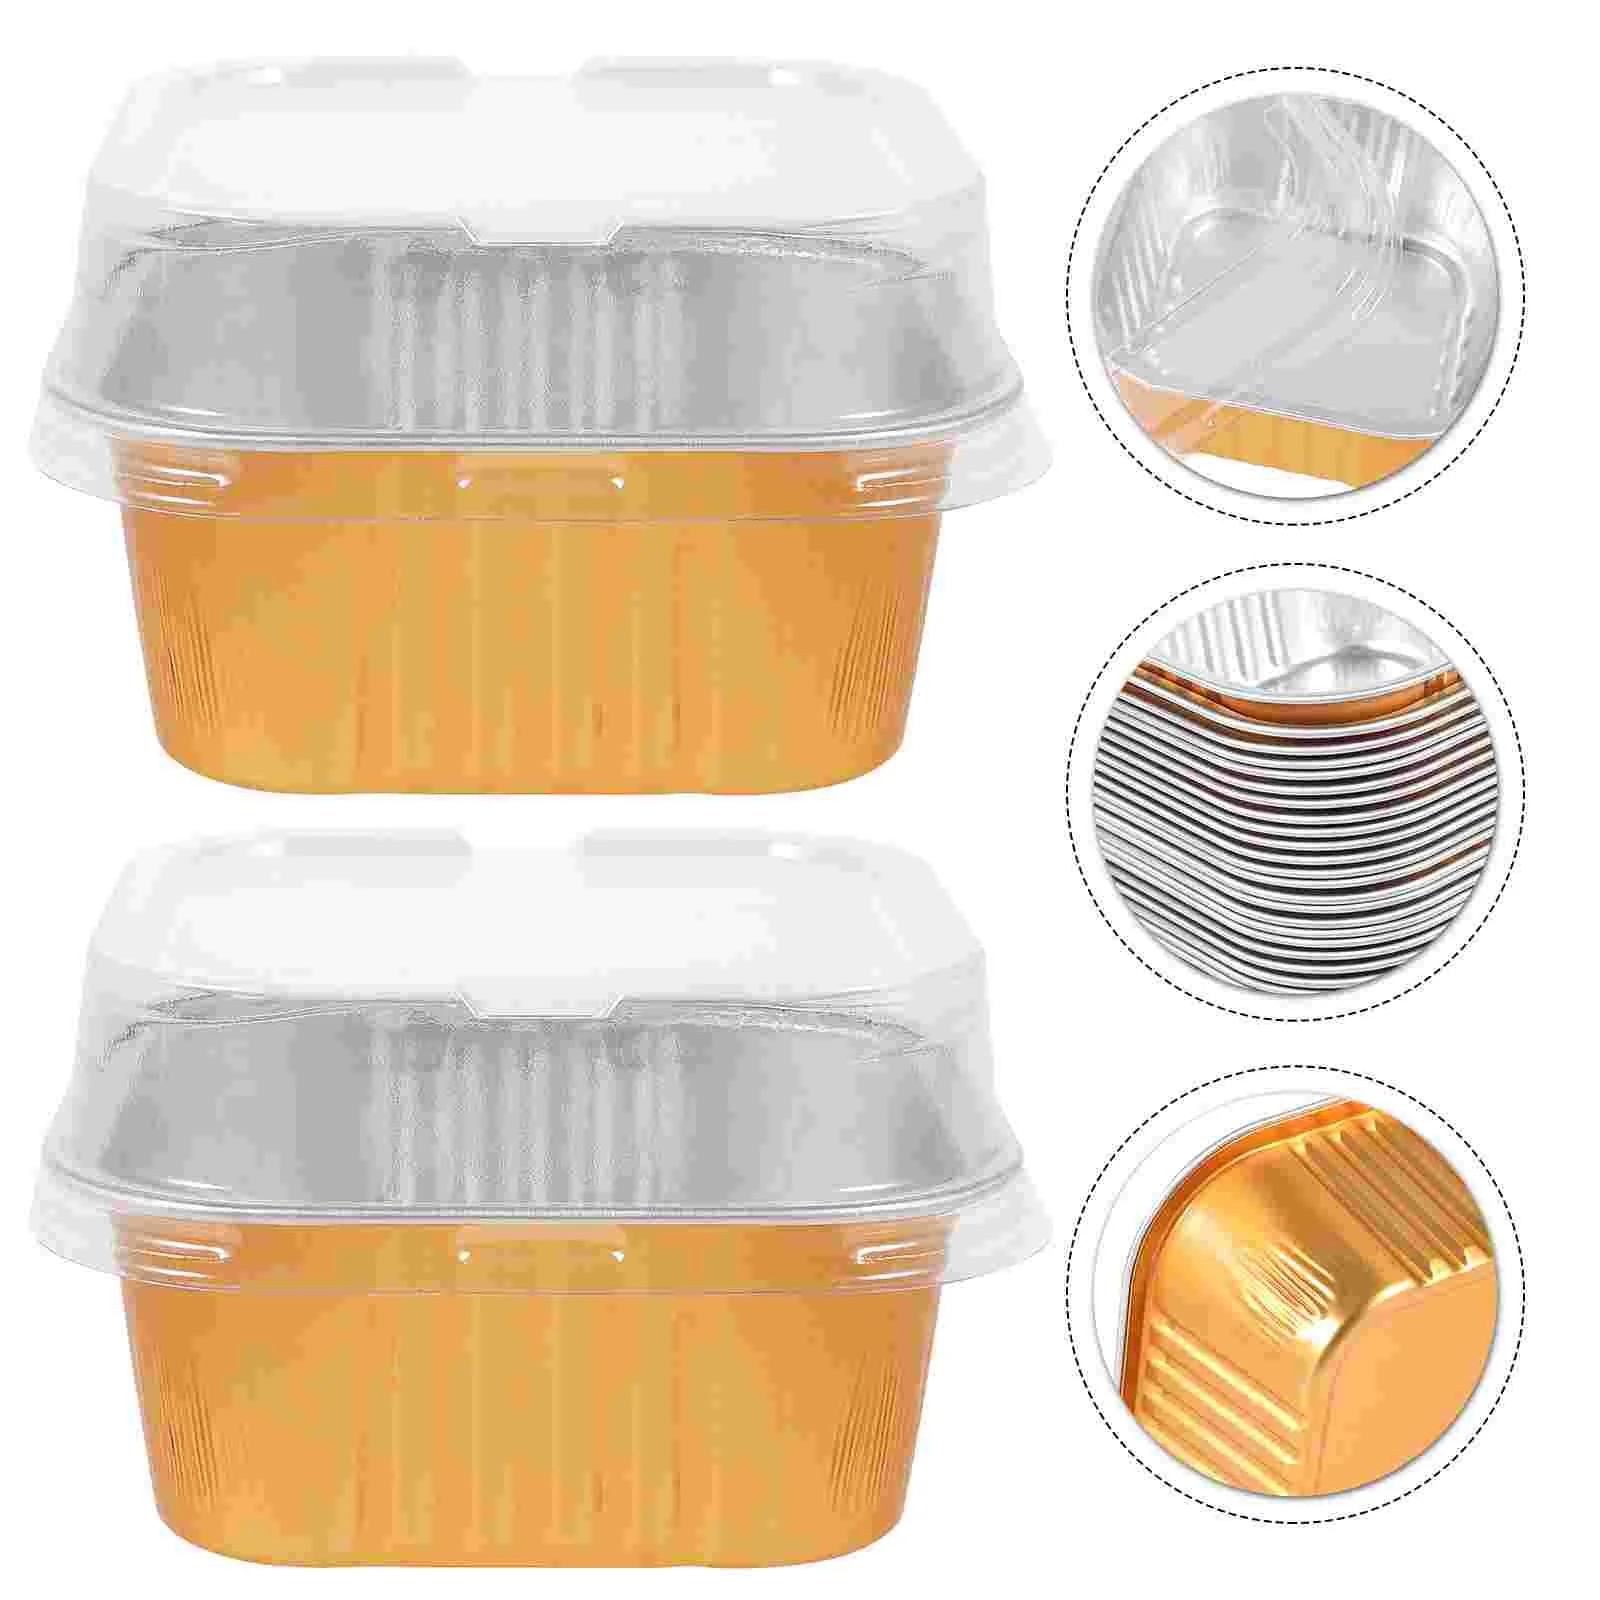 

40 Sets Aluminum Cake Pans Loaf Pans Lids Foil Muffin Pans Cupcake Cups Small Tins With Lids Ramekins for Baking Kitchen Home